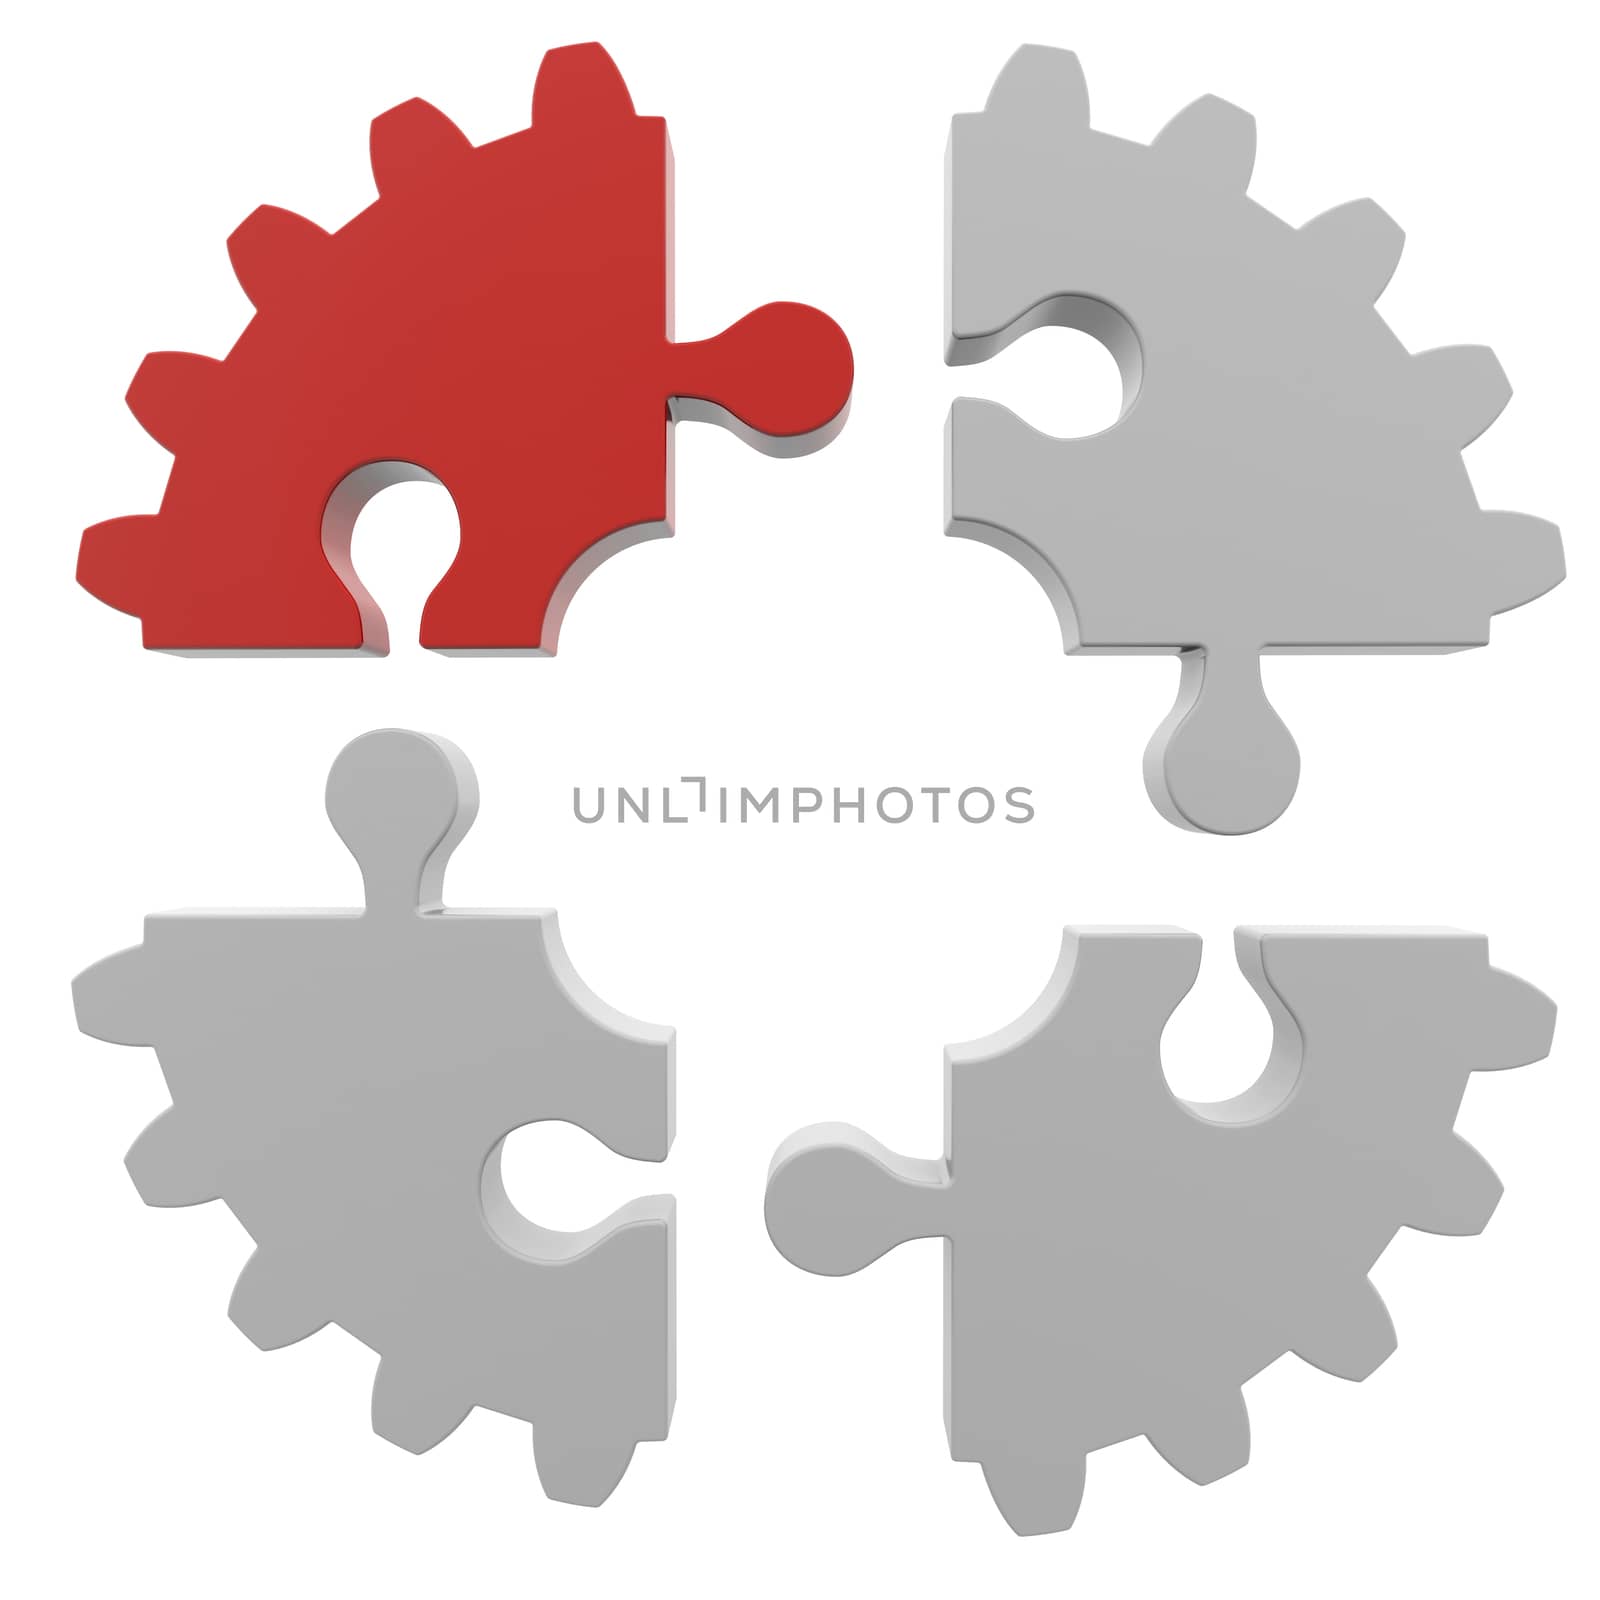 Gear consisting of puzzles. Isolated render on a white background